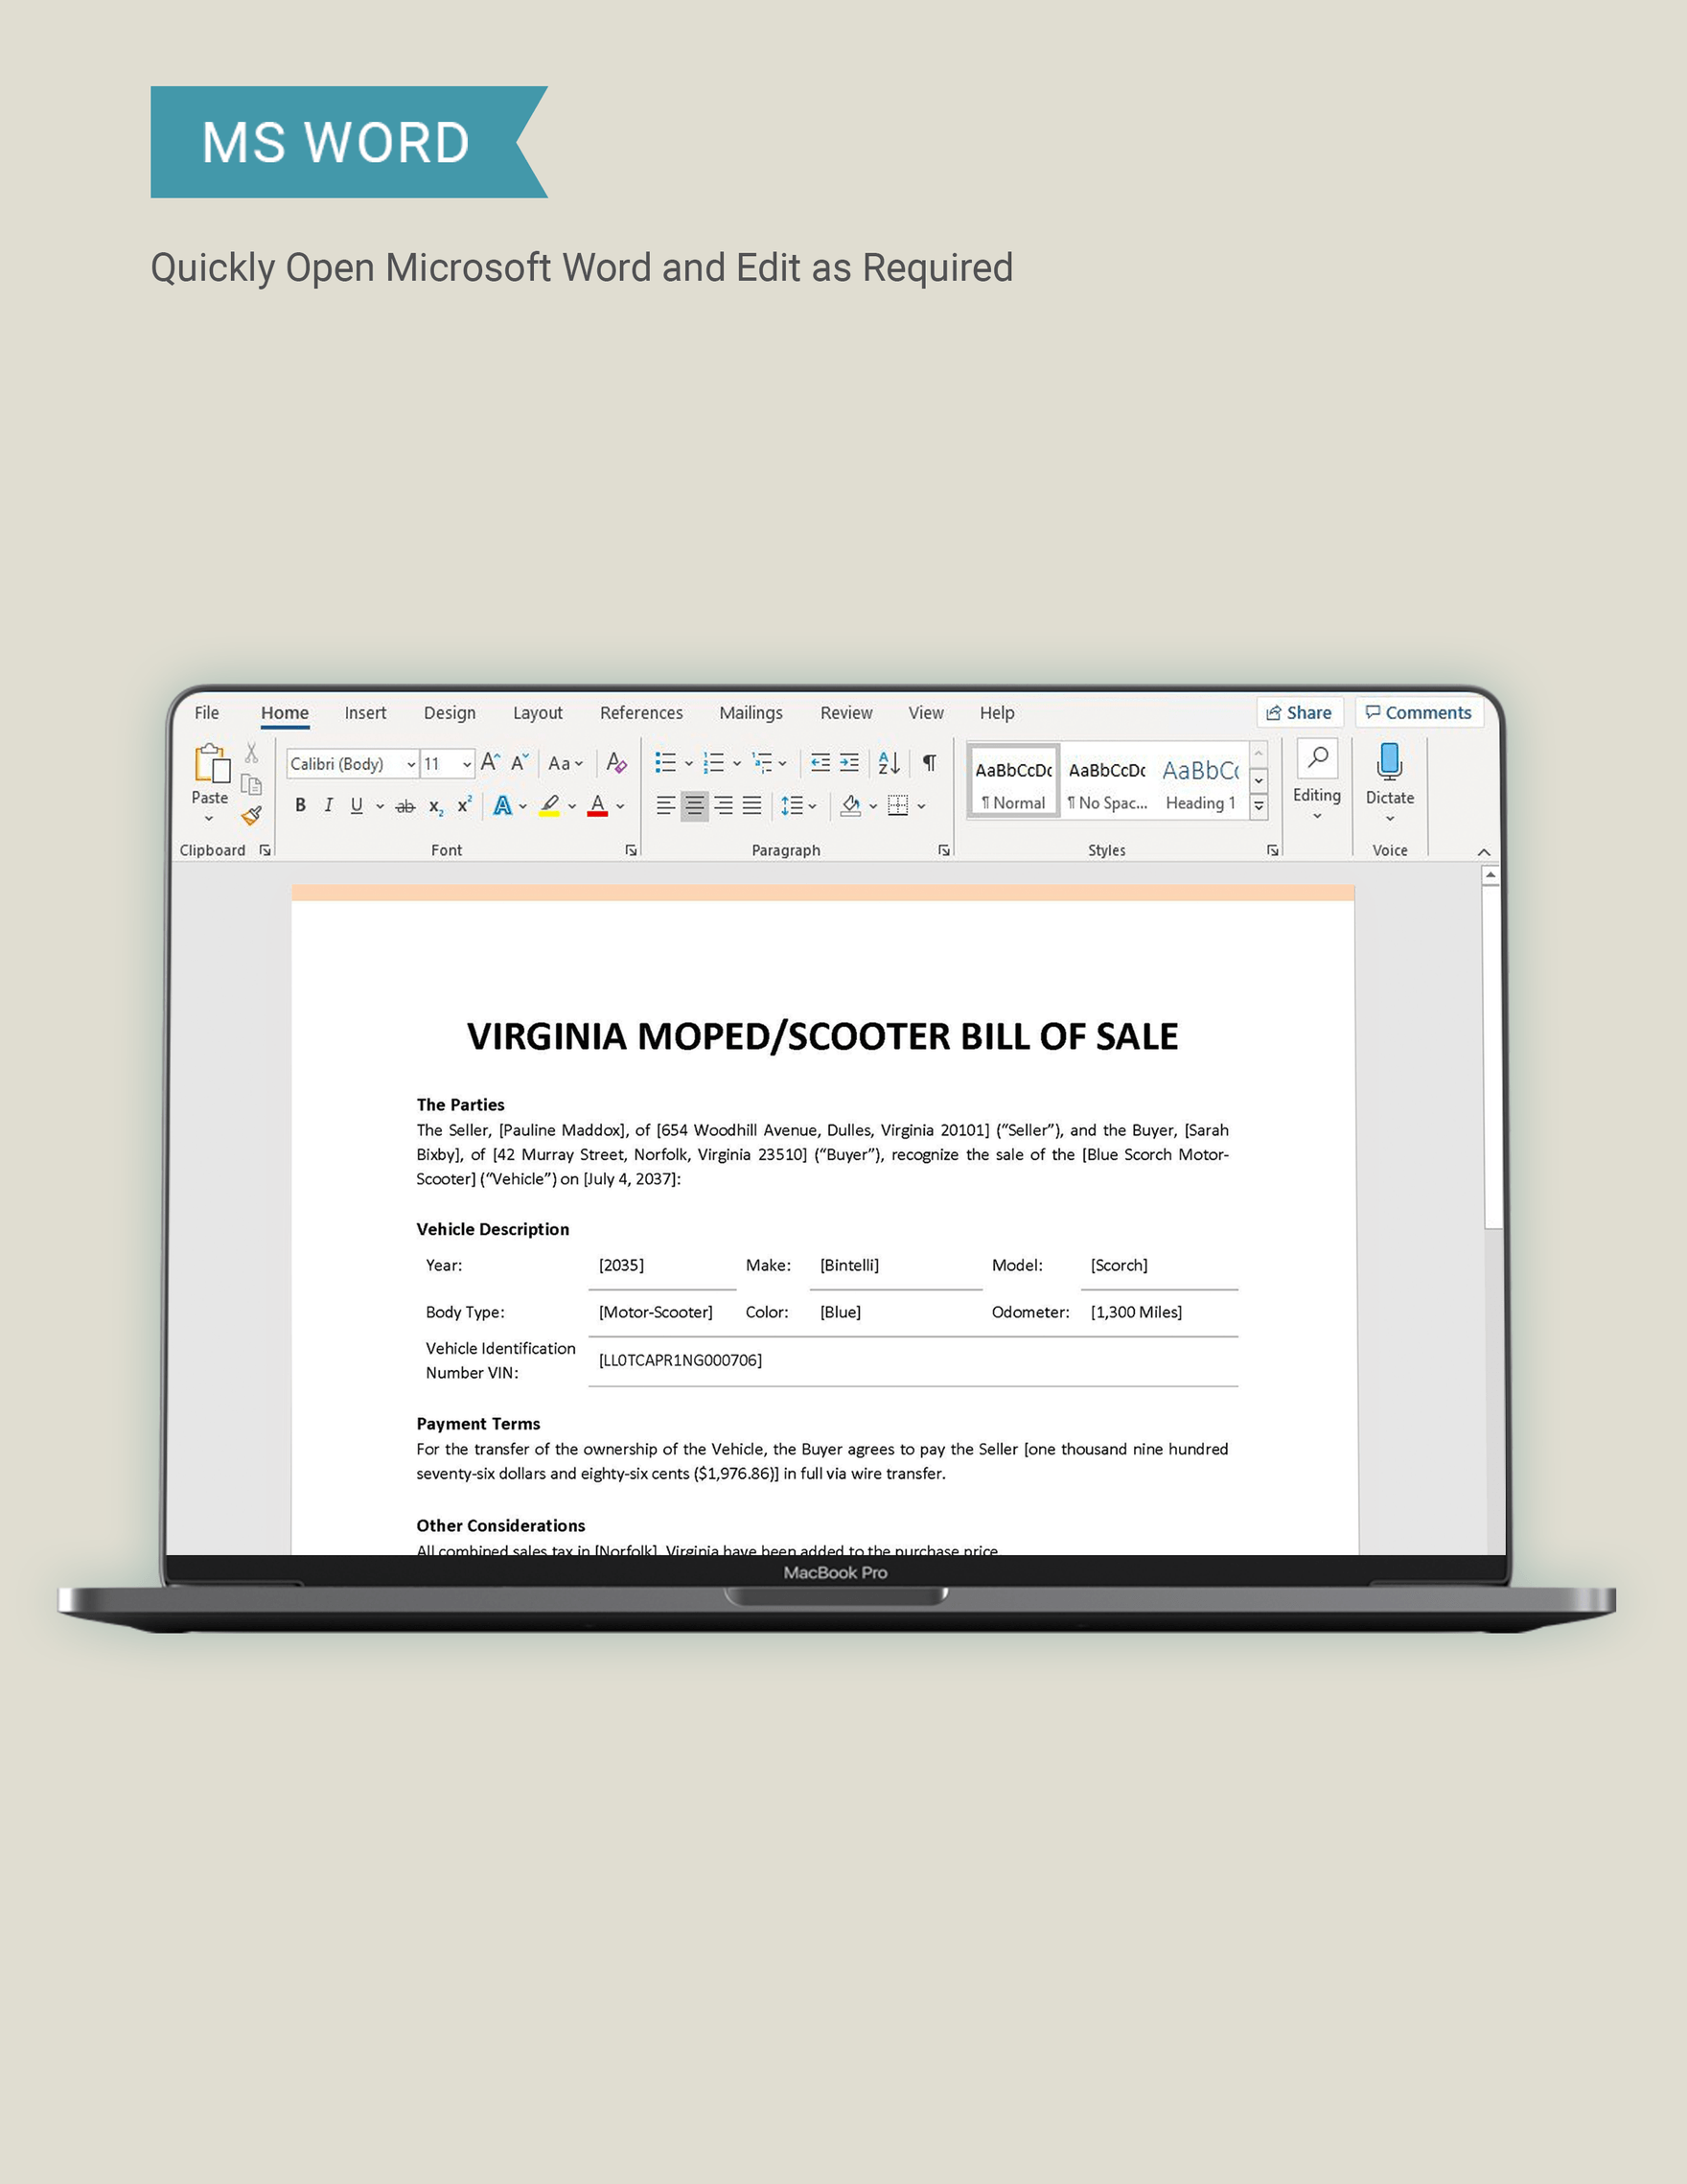 Virginia Moped / Scooter Bill of Sale Template